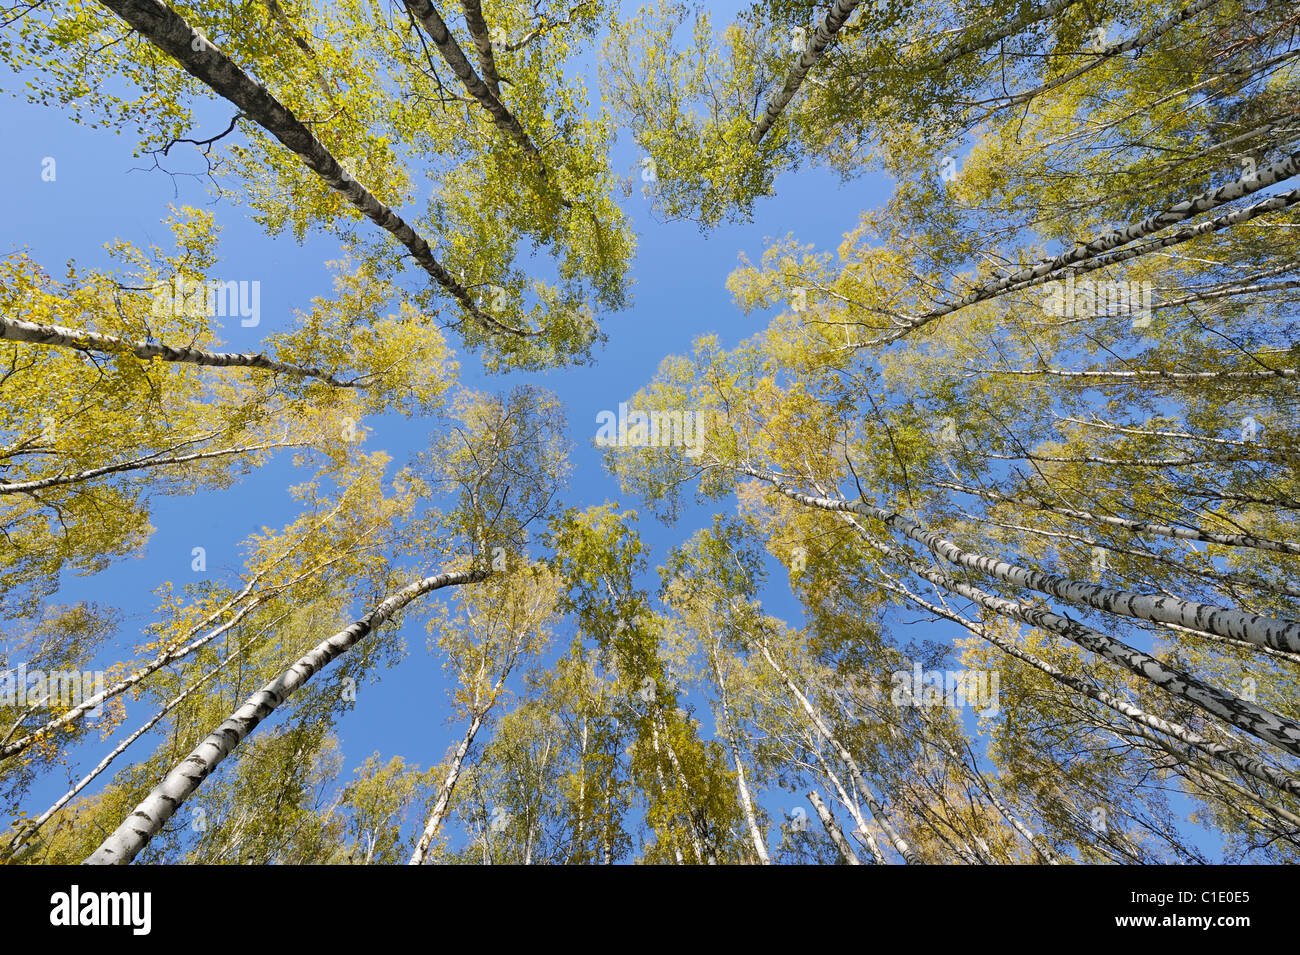 Looking up in birch forest with wide angle lens Stock Photo